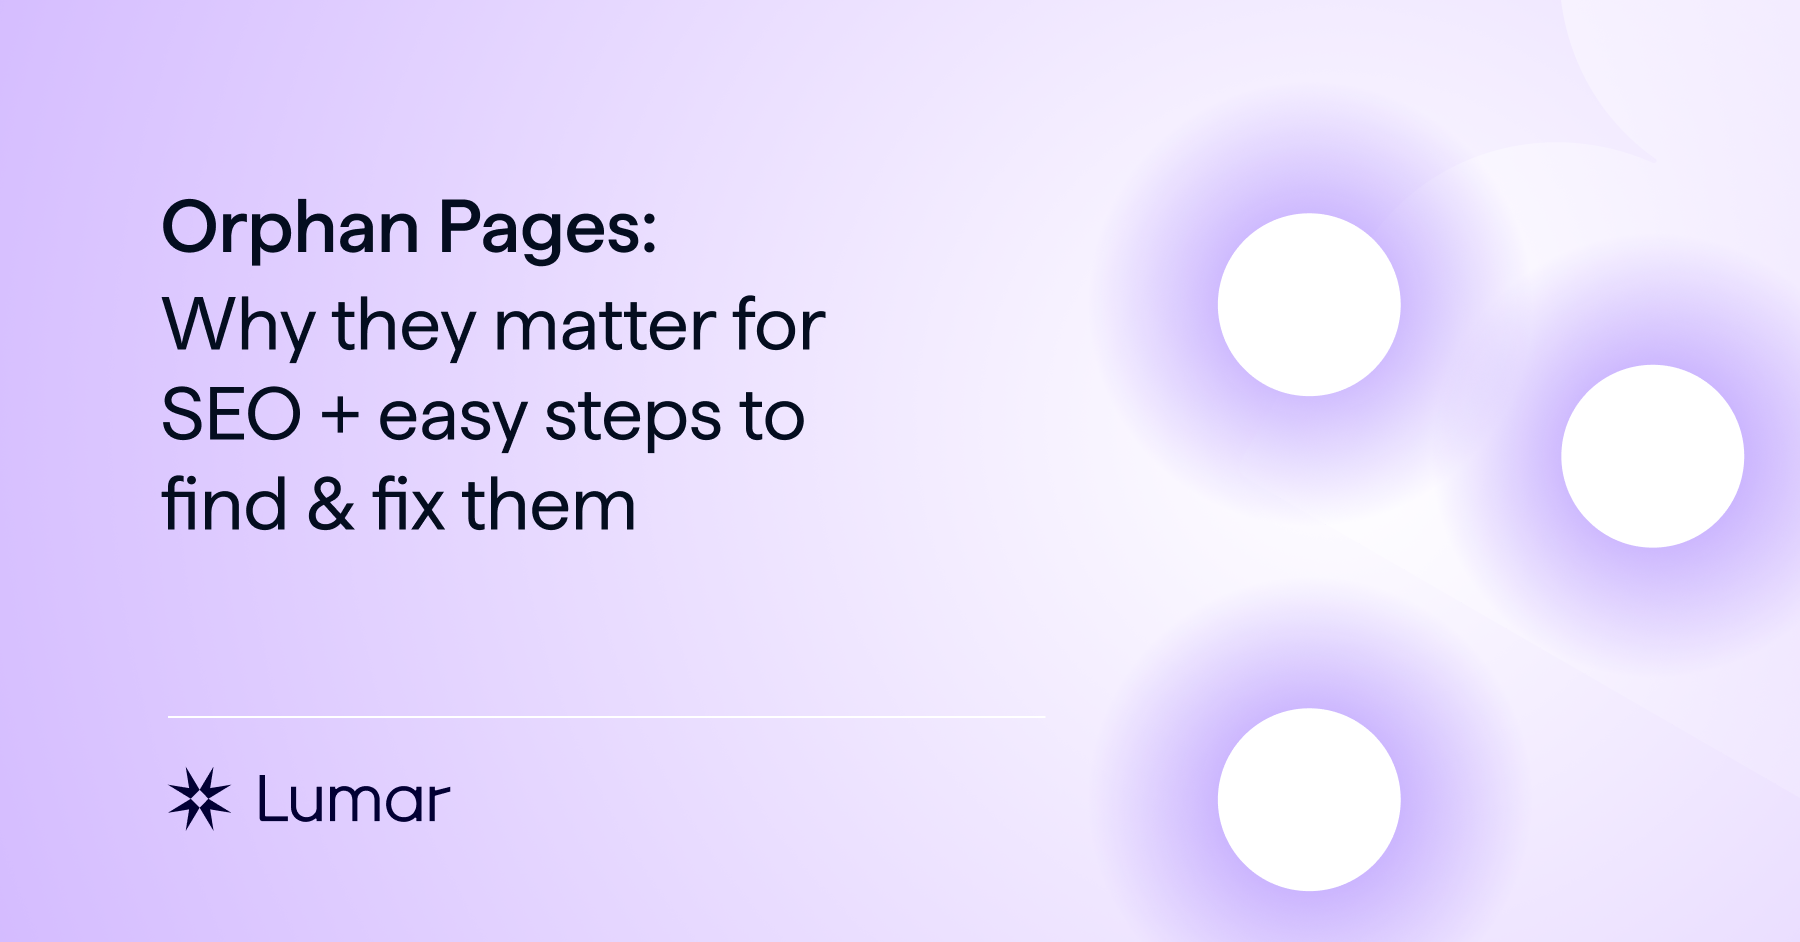 What are orphan pages? And how can you find and fix them for SEO?